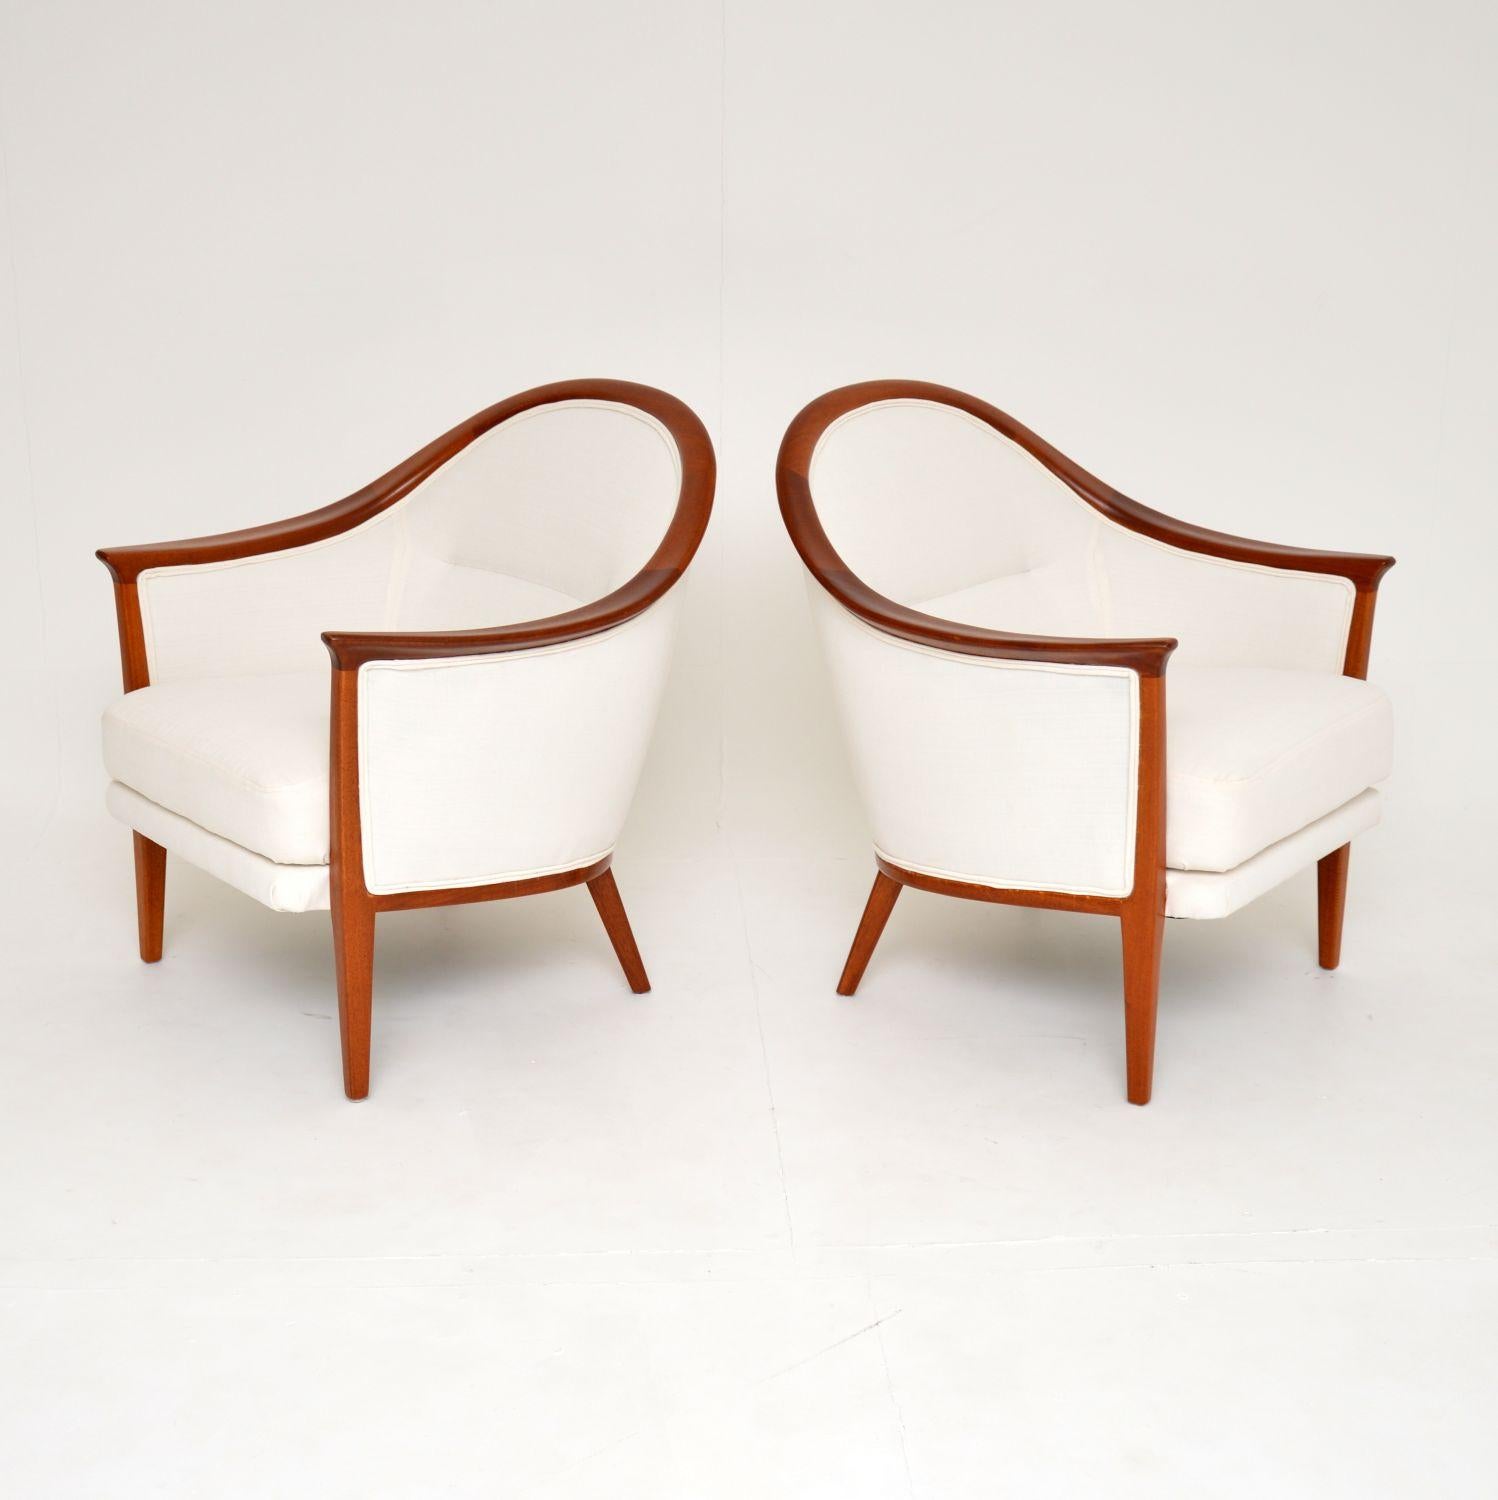 A beautiful pair of vintage Swedish armchairs in solid teak. These were designed by Bertil Fridhagen and made by Bodafors in 1962. The makers stamp and year of production is seen beneath the frames.

They have an absolutely gorgeous design, with